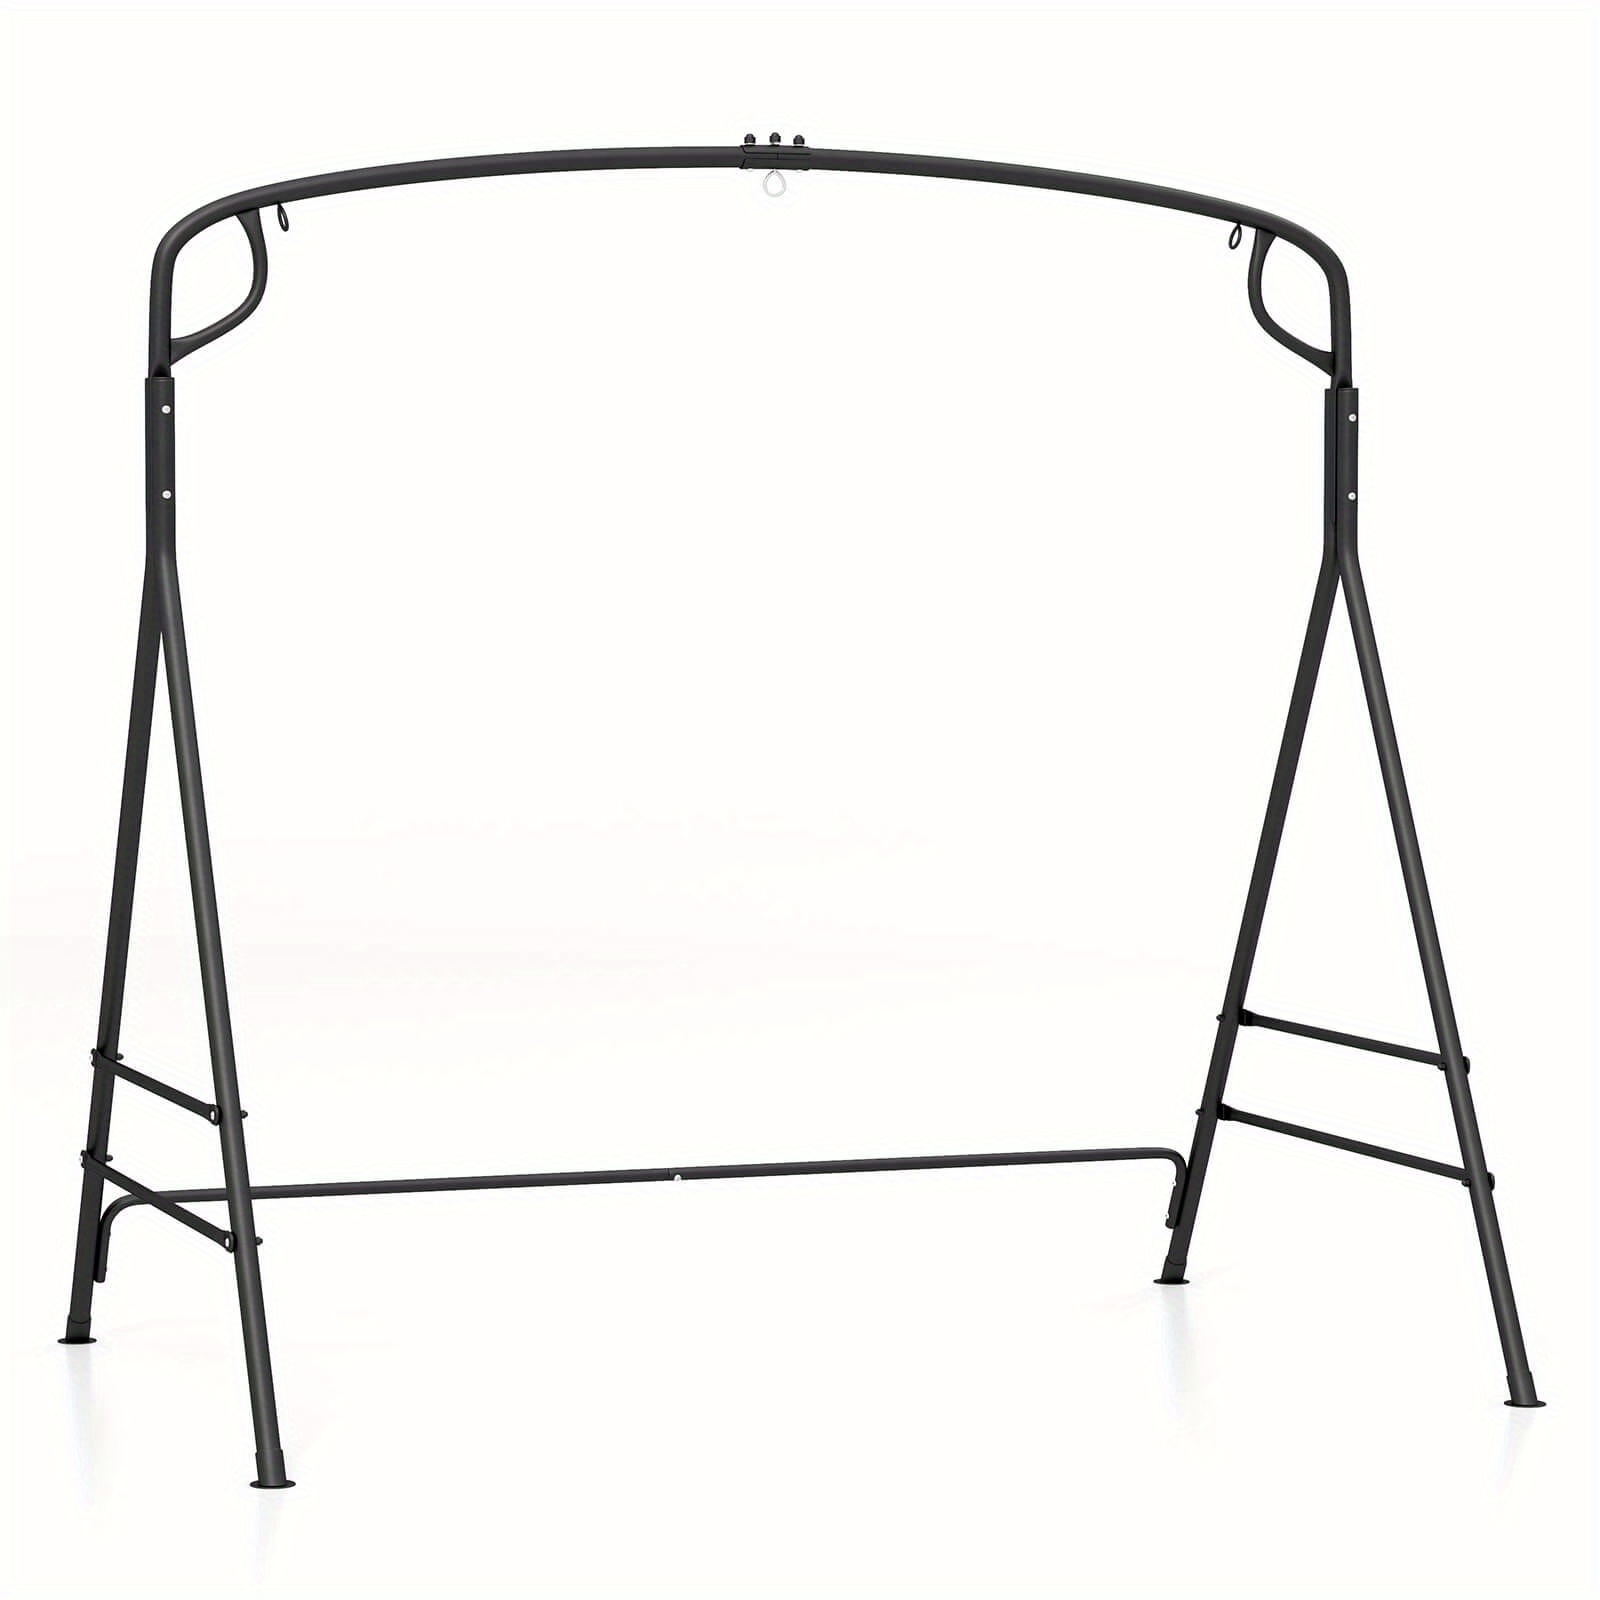 

Costway Outdoor Metal Swing Frame Sturdy A-shaped Porch Swing Stand W/ Extra Side Bars